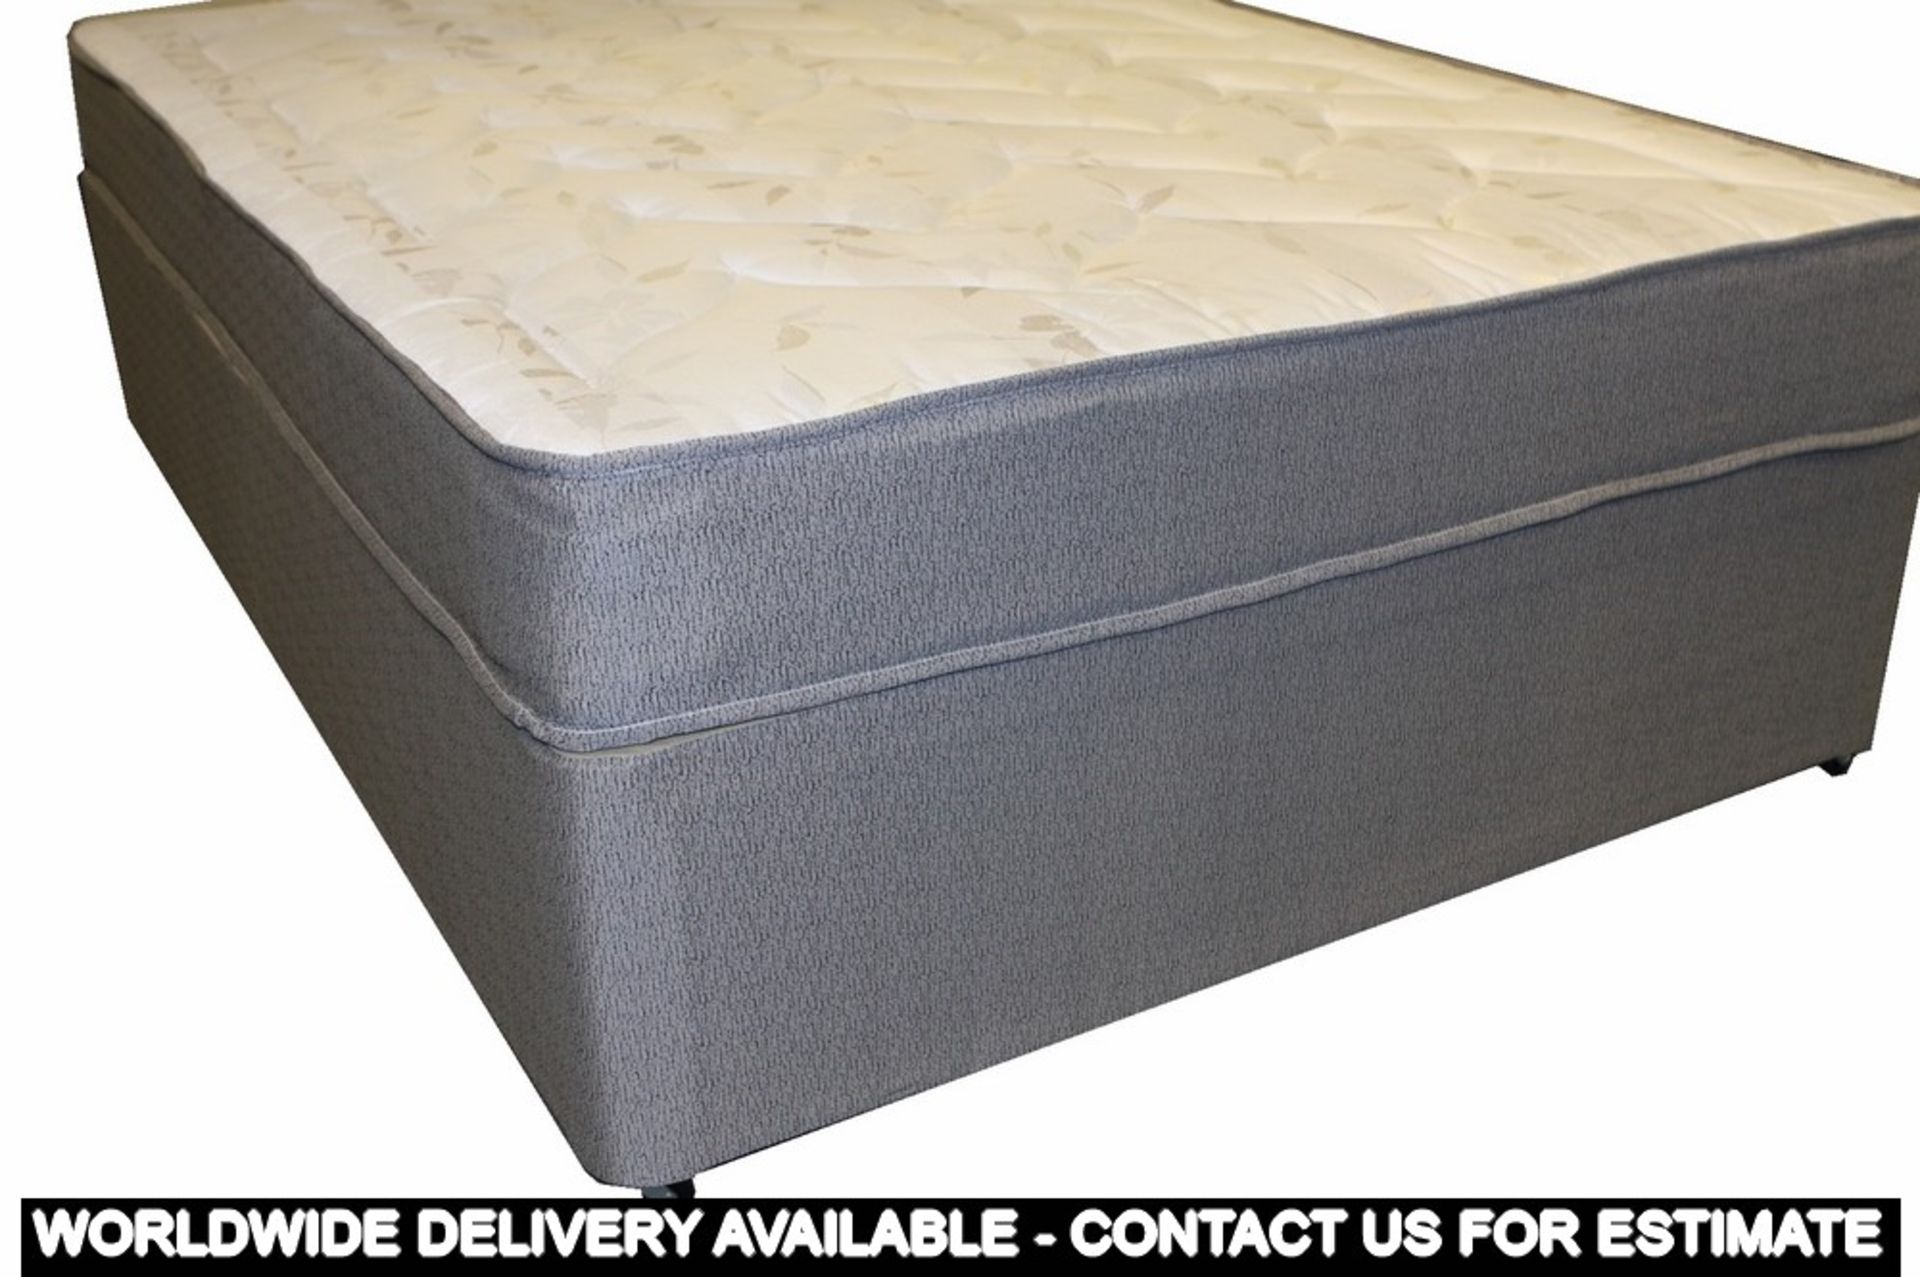 3ft Comfy Sprung Divan Bed with two storage drawers (sd16aa+sdb6aa)